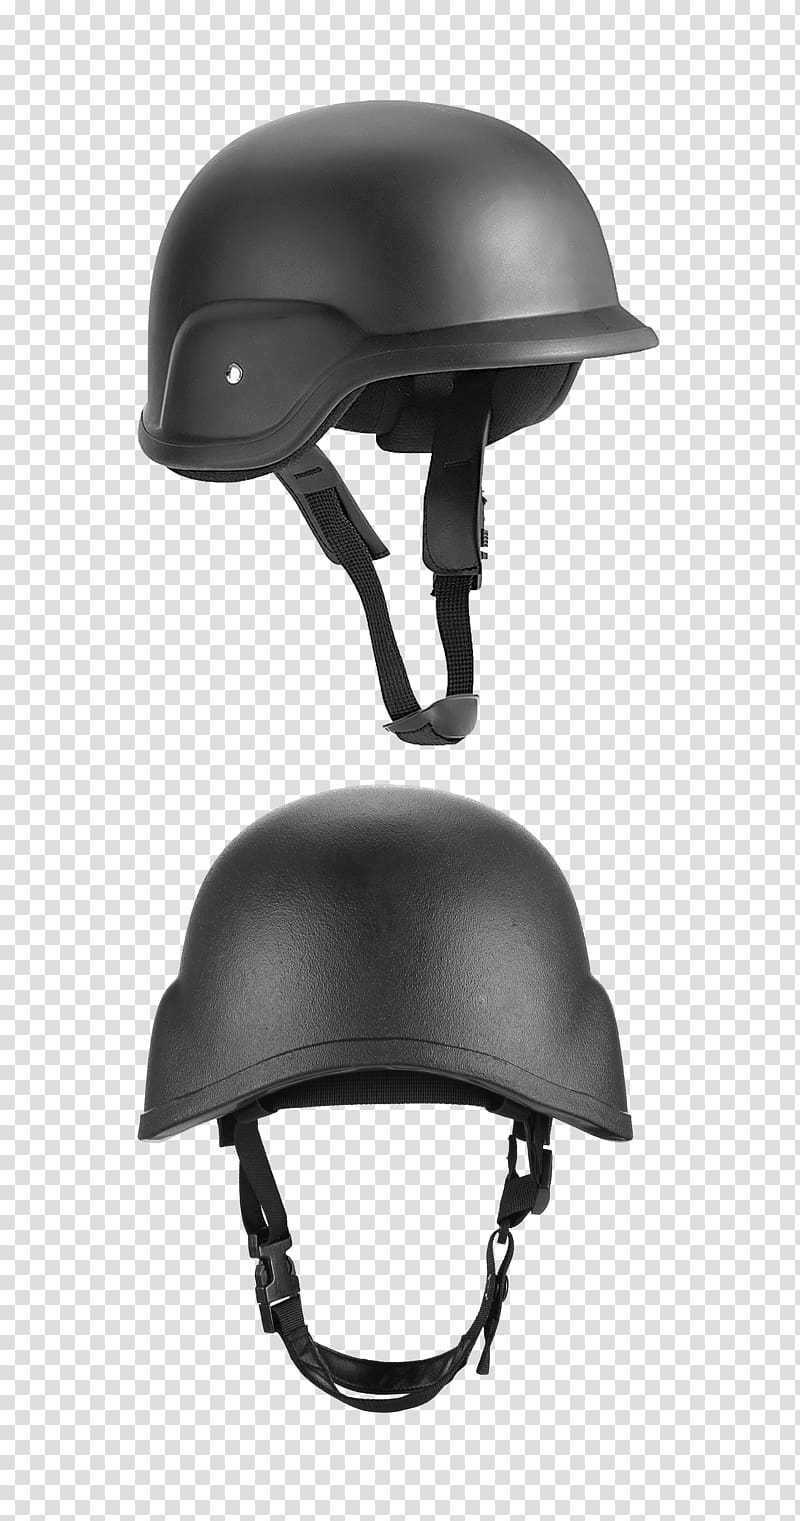 Combat helmet Military surplus Personnel Armor System for Ground Troops, Helmet transparent background PNG clipart